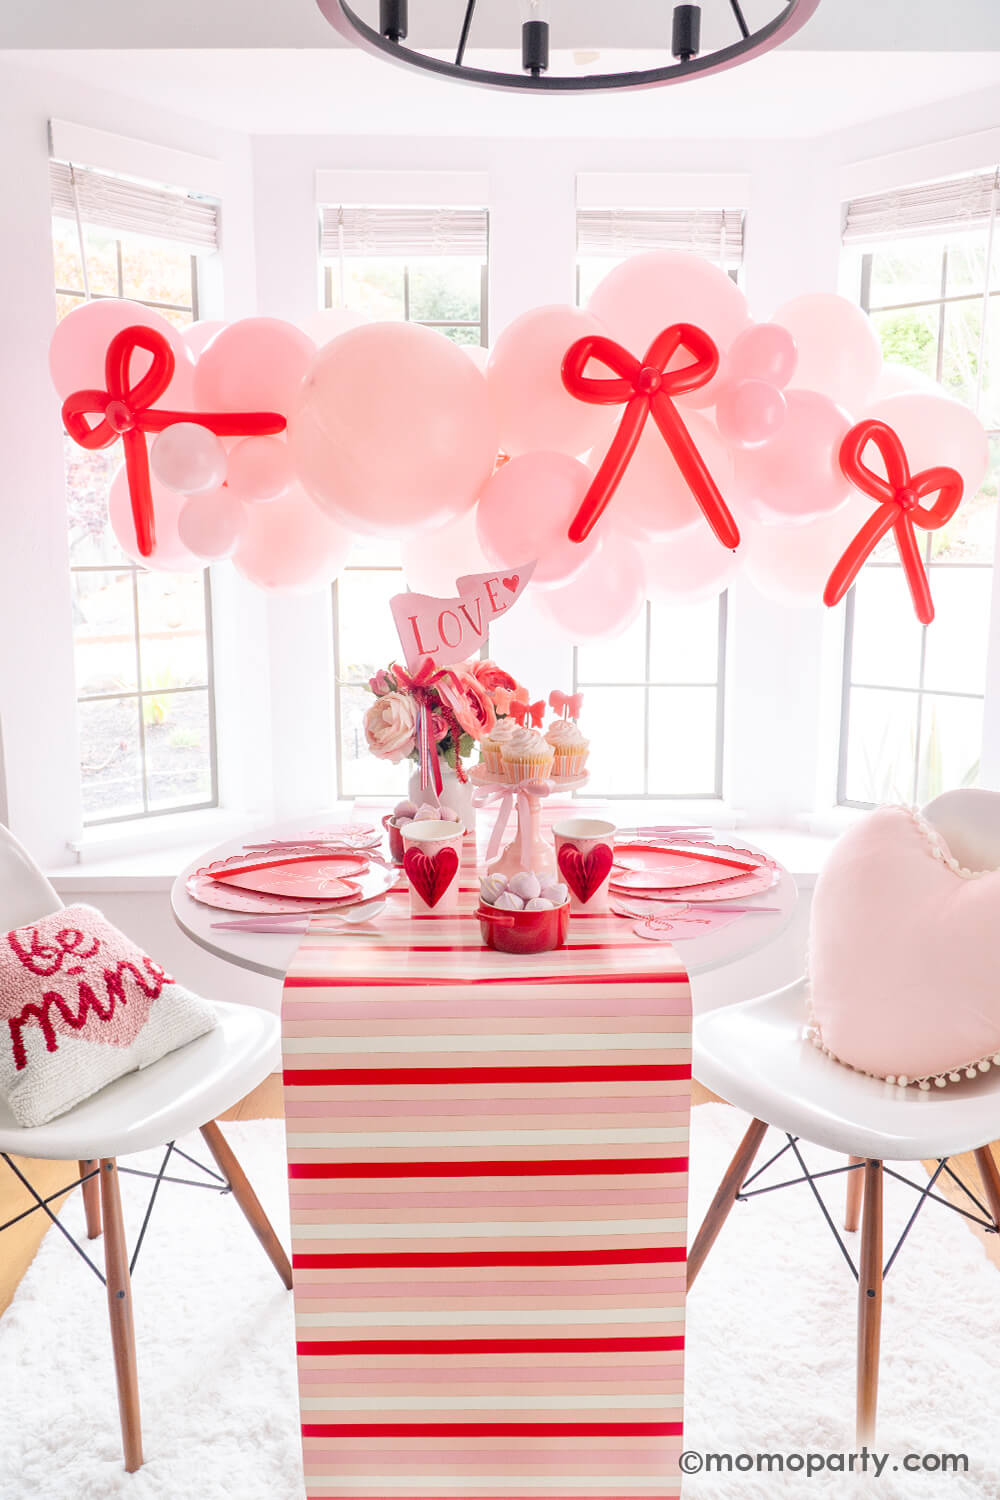 Tying the Knot of Love: A Bow-Themed Valentine's Day Party Set up by Momo Party. A pink balloon garland with a red bow-shaped balloon hangs above the Bow-tastic Table, adorned with Meri Meri Heart Pattern Dinner Plates, Bow Plates, matching napkins, Honeycomb Heart Cups, Blush and White Cutlery Set, Pink Bow Candles on cupcakes, and a Love Party Pennant gracing the flower vase. All elegantly arranged on a red-striped paper runner. A cute idea for your Valentine's celebration or Galentine's Day with besties